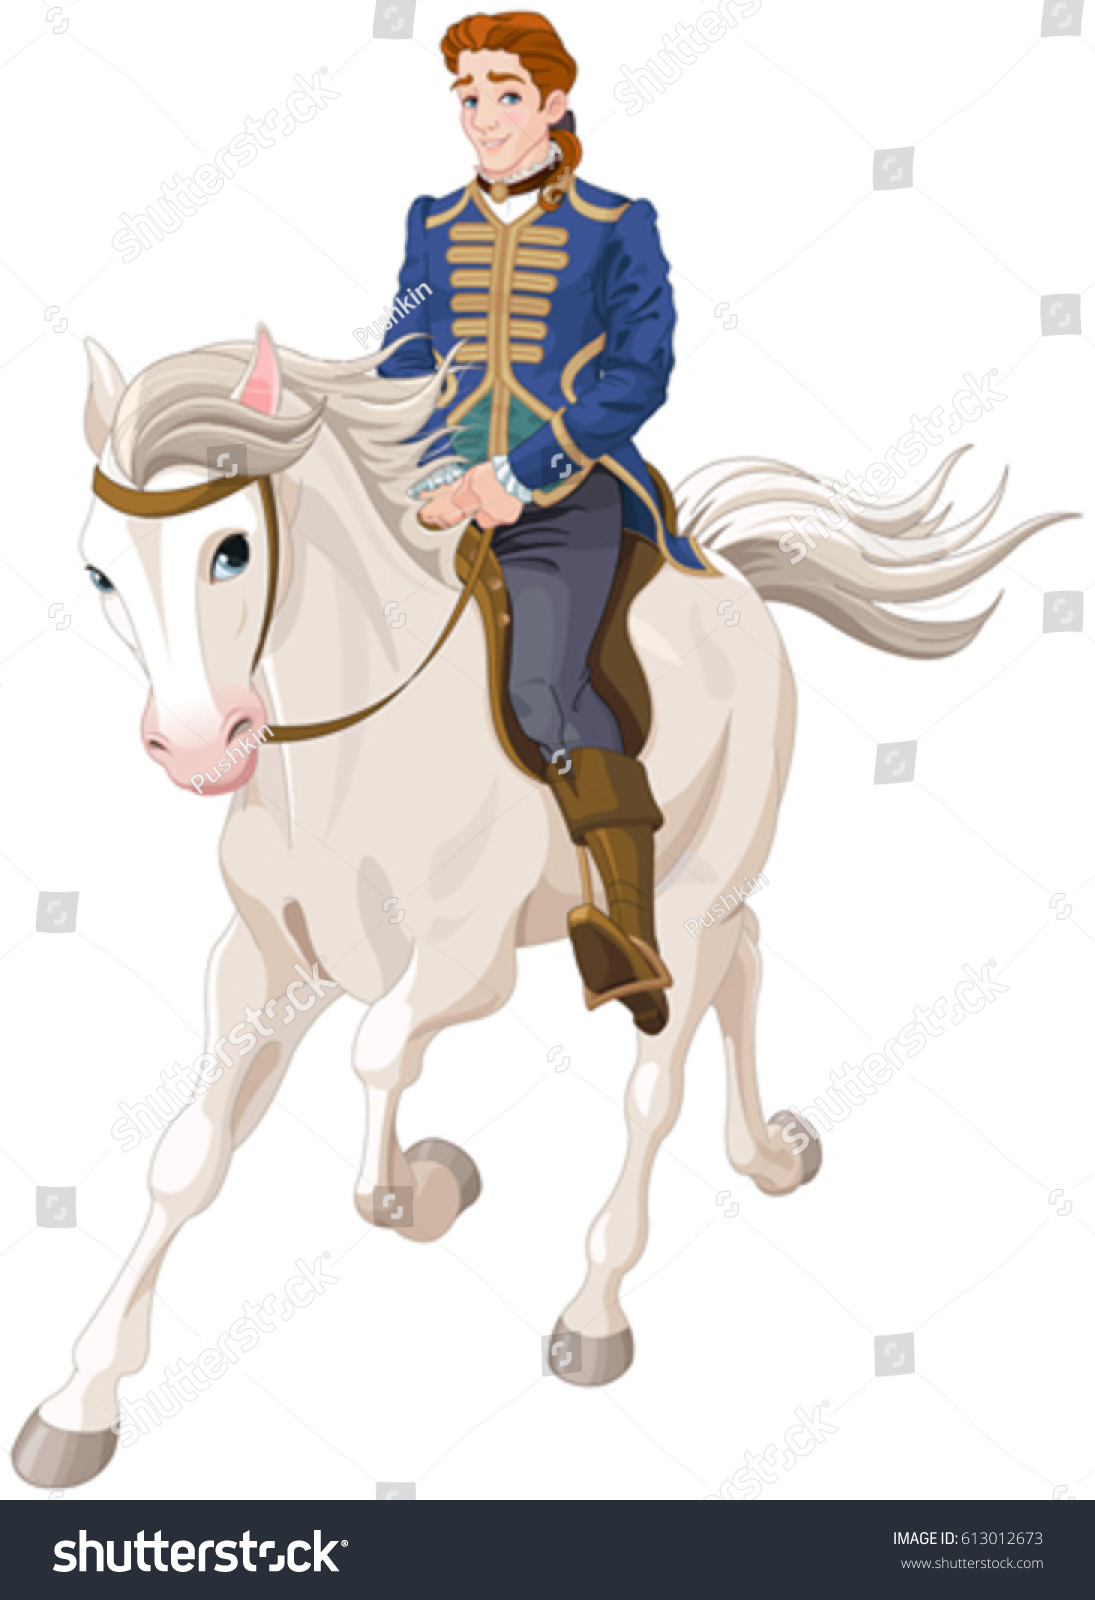 SVG of 
Illustration of Prince Charming riding a horse

 svg